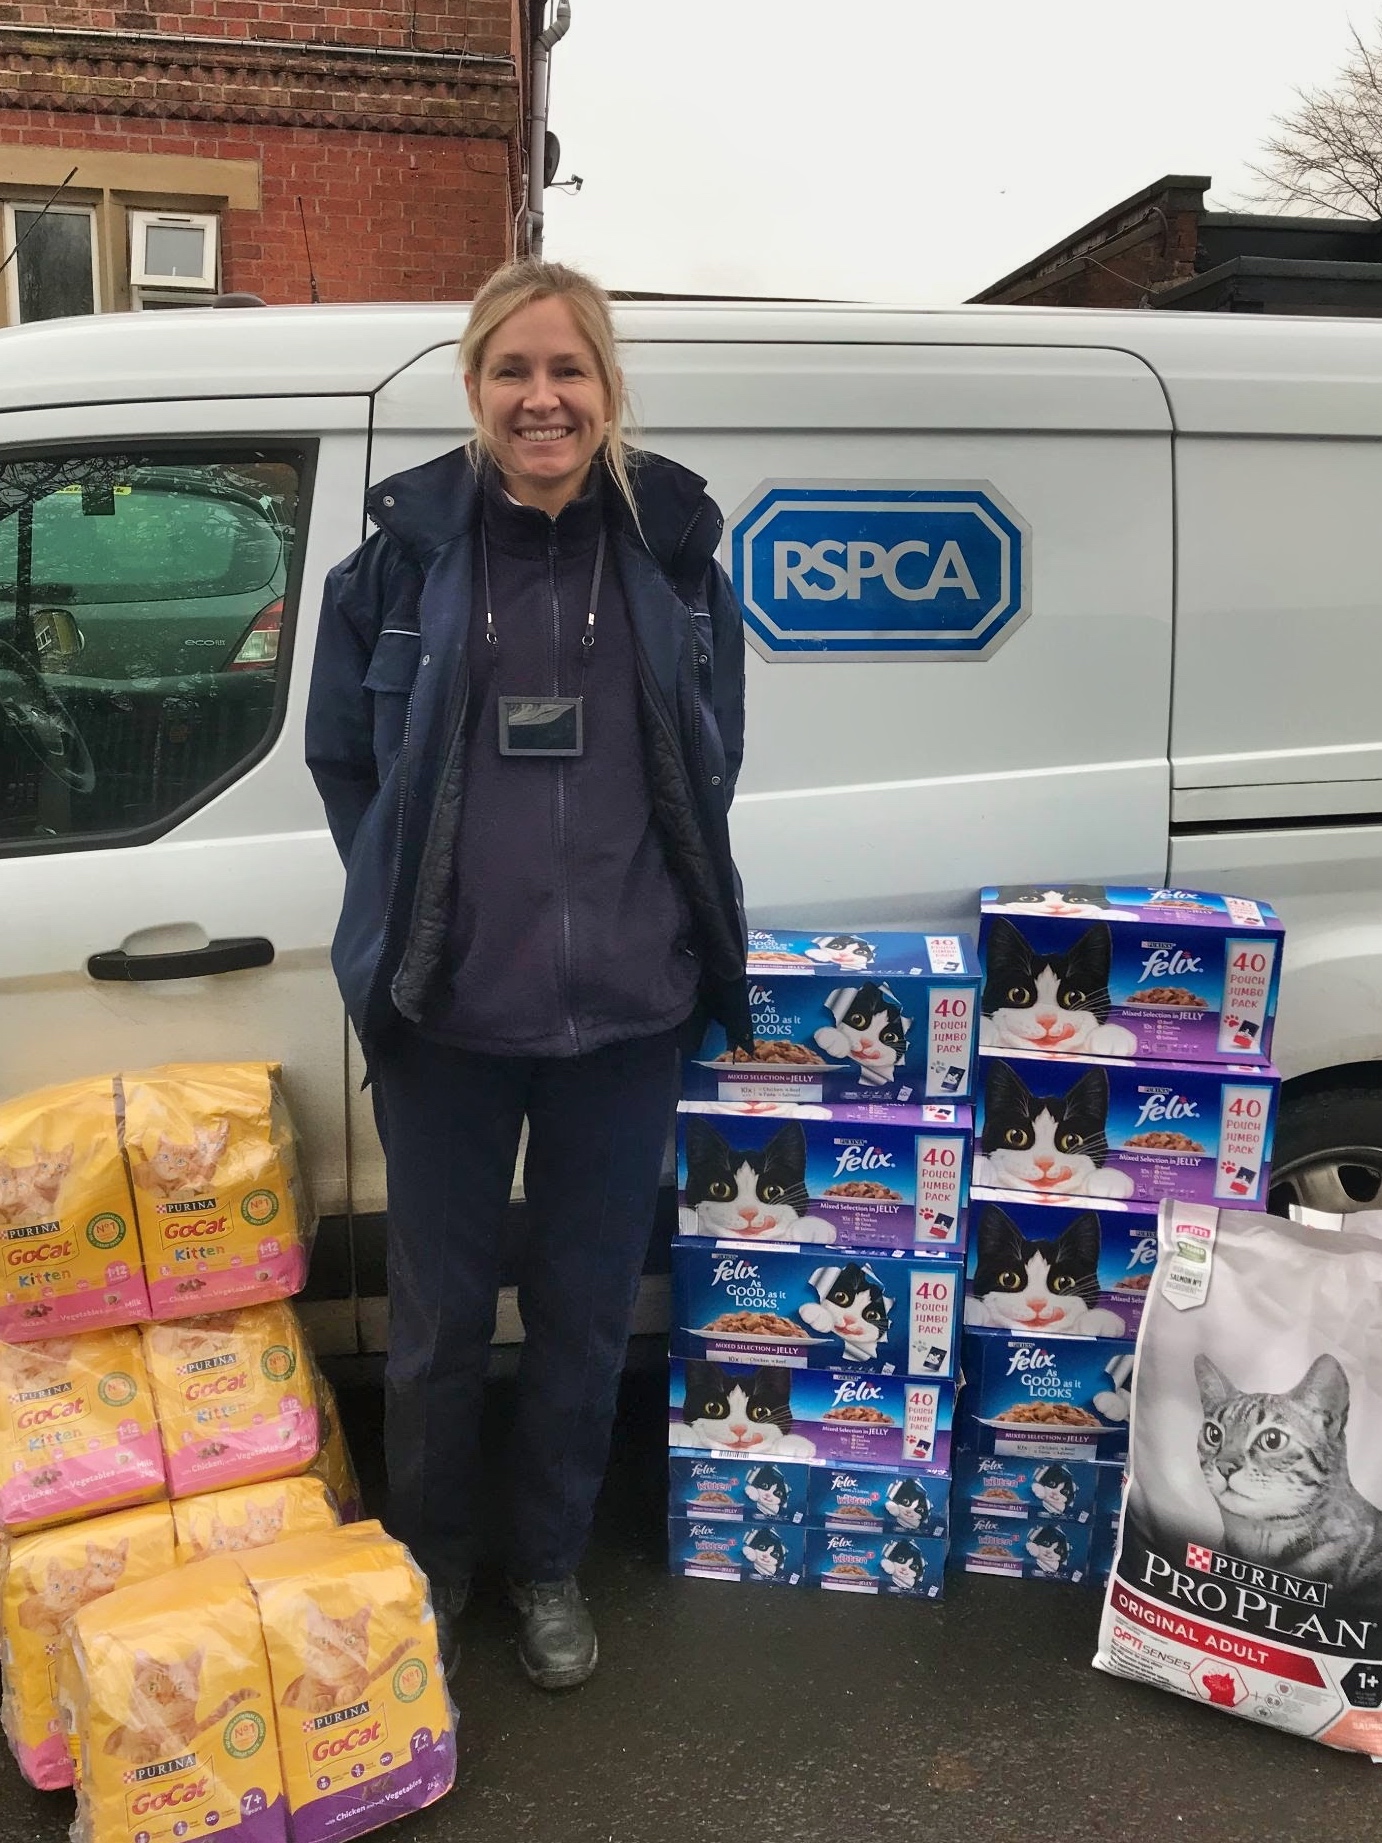 RSPCA Appeals For Pet Food Donations As Food Bank Project Expands Into North East